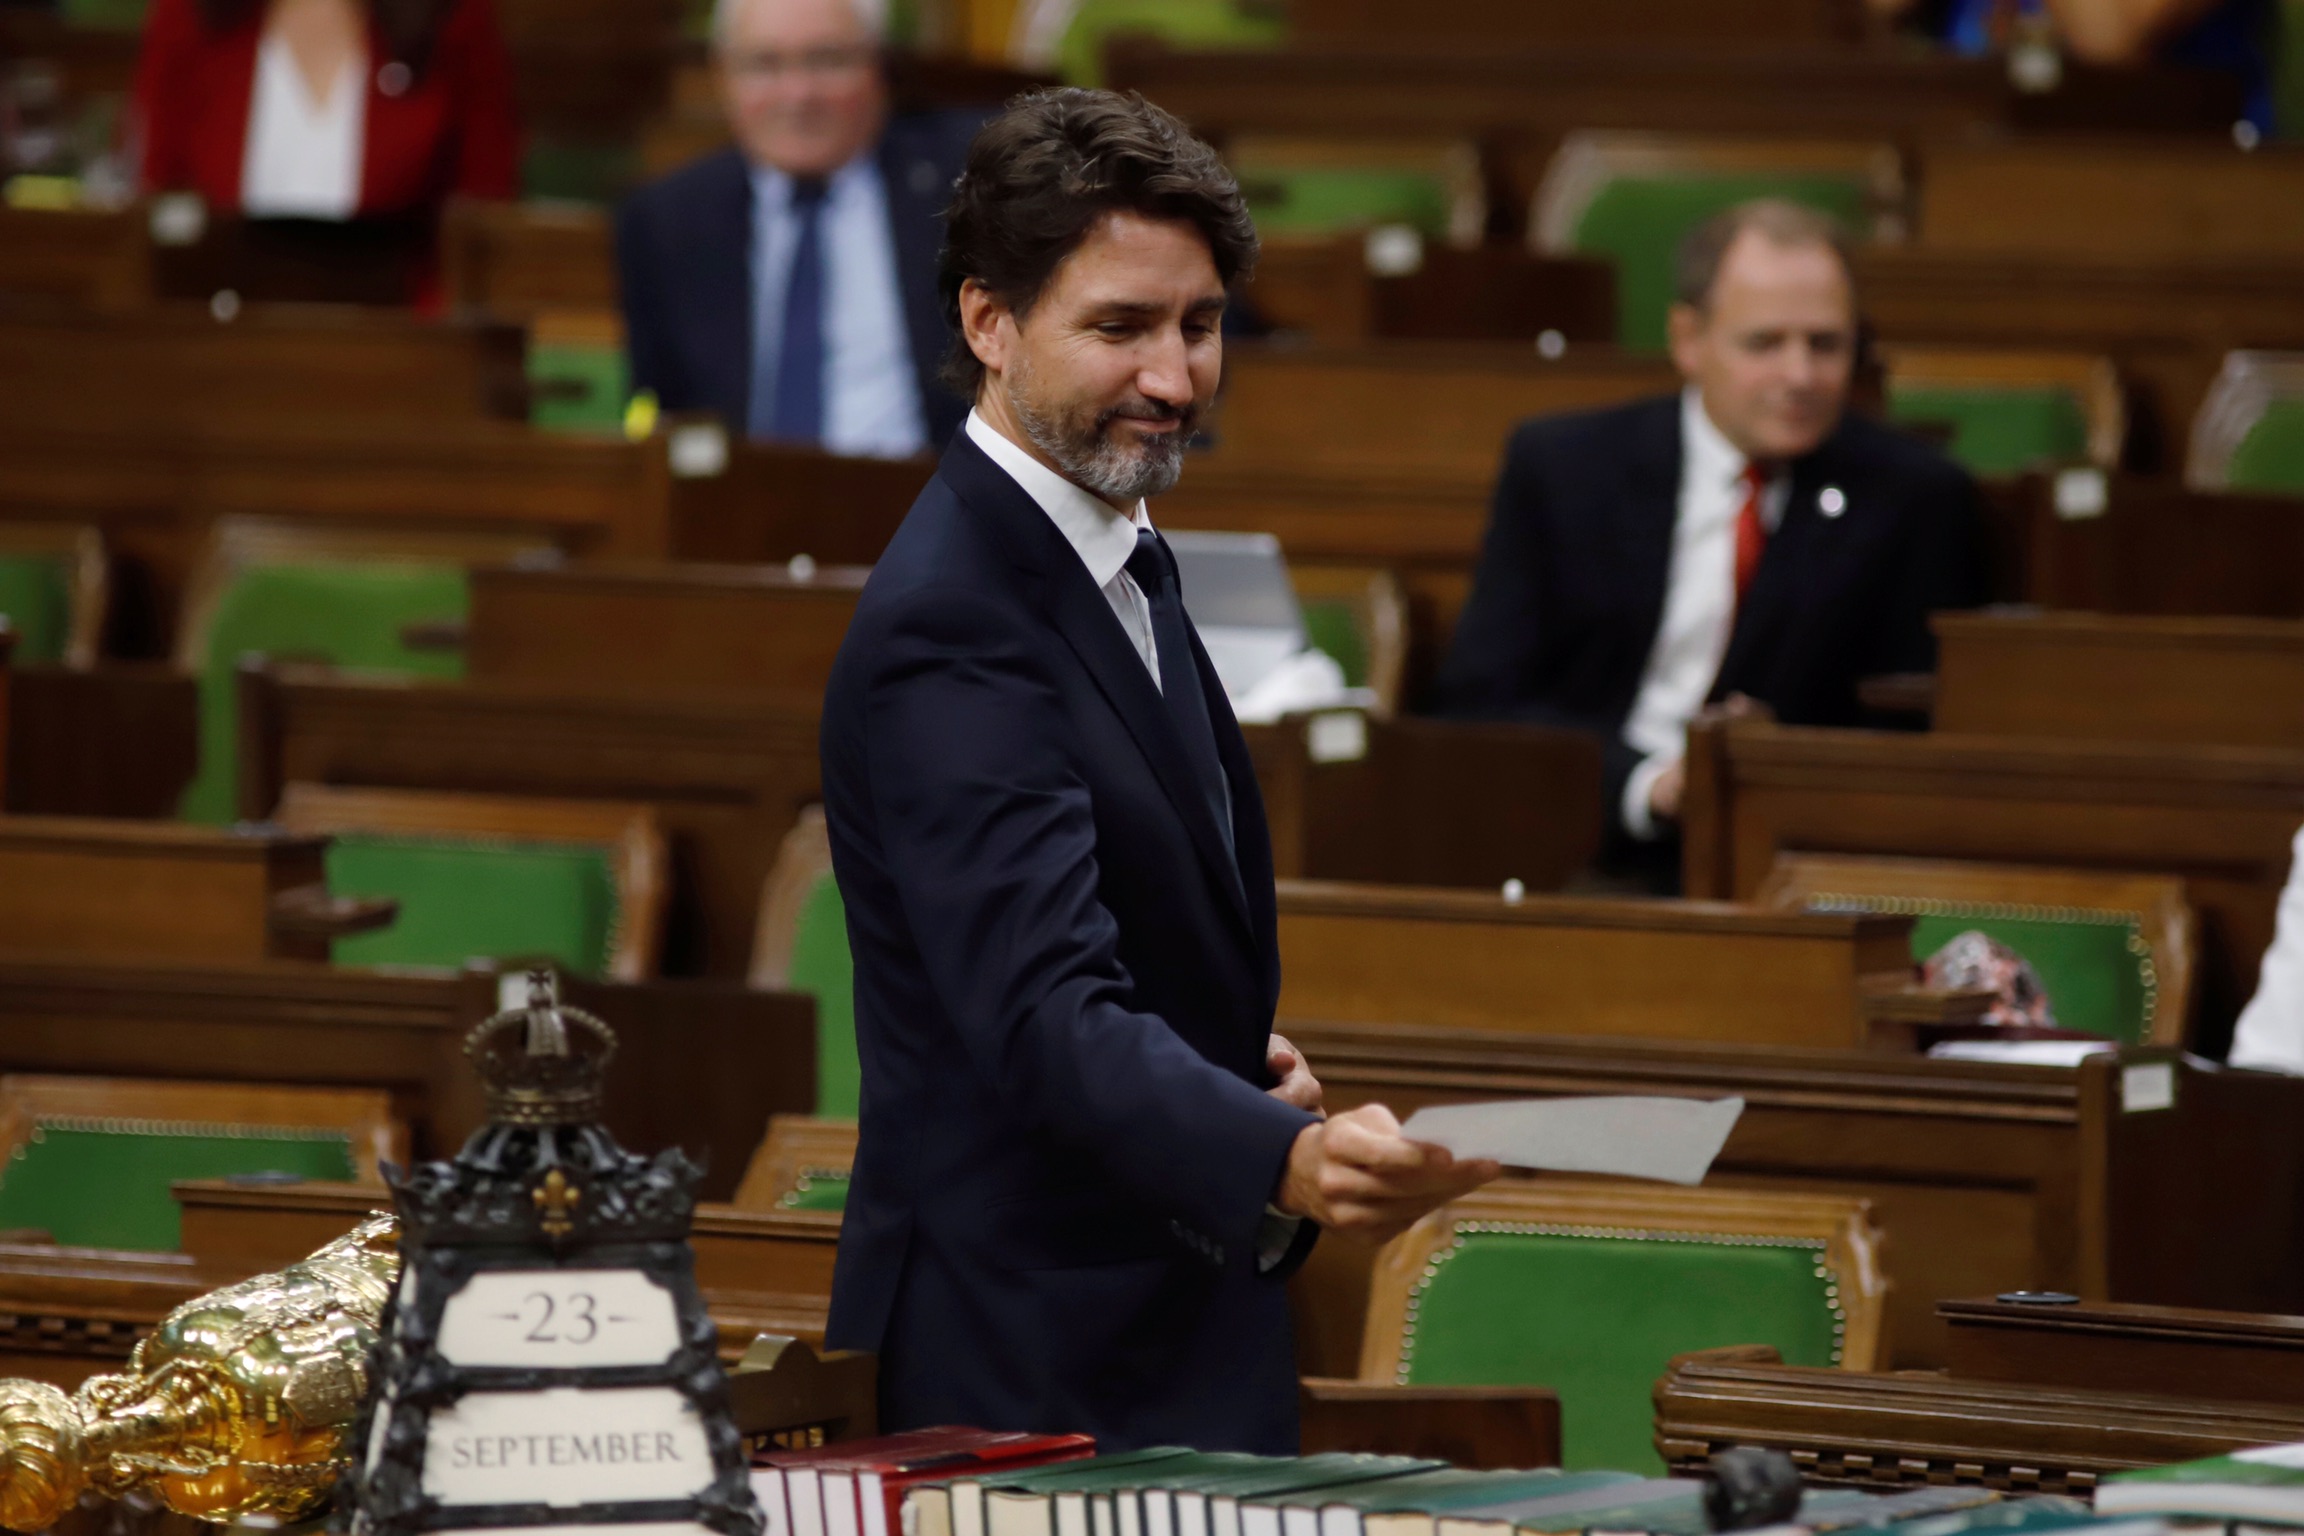 Canada's Prime Minister Justin Trudeau officially tables the Throne Speech in the House of Commons as parliament resumes in Ottawa, Ontario, Canada September 23, 2020. REUTERS/Patrick Doyle